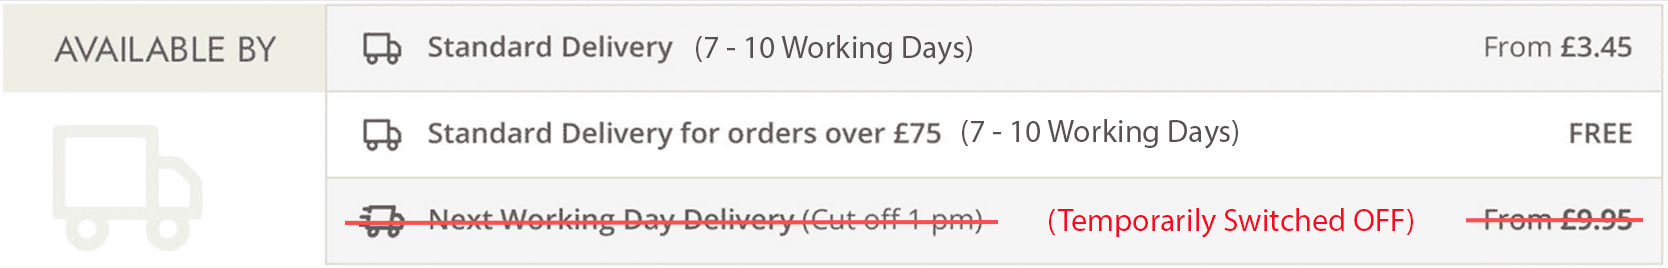 Delivery times 4 - 7 working days with next day delivery